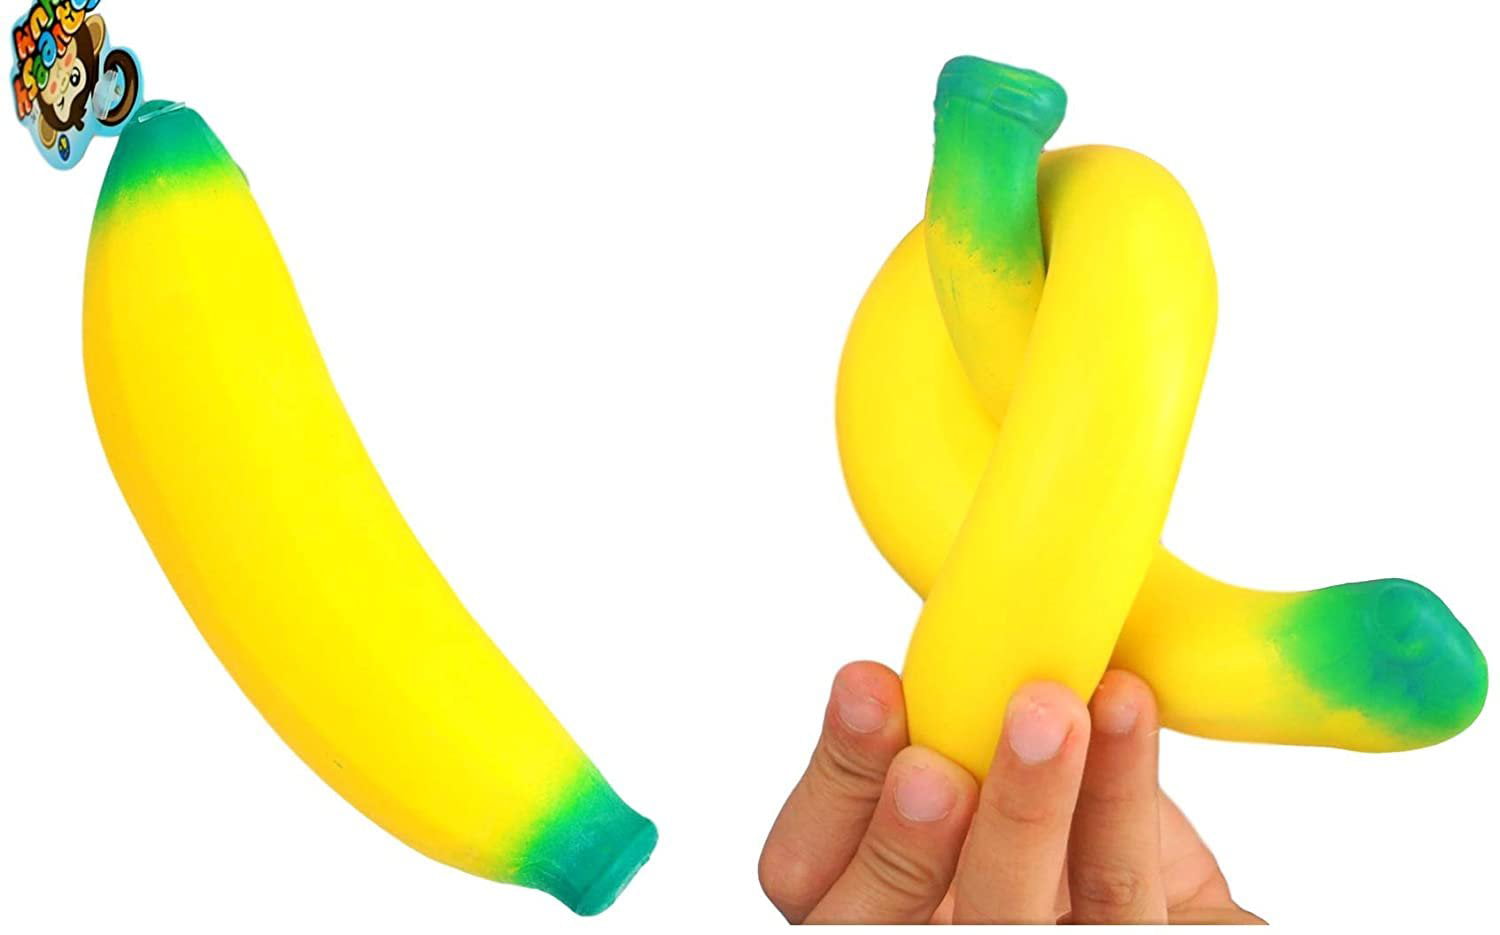 JA-RU Stretchy Banana Squishy Toys (2 Units) Anxiety Stress Relief Toys |  Sensory Toys for Autistic Children Kids and Fidget Stress Toys for Adults.  